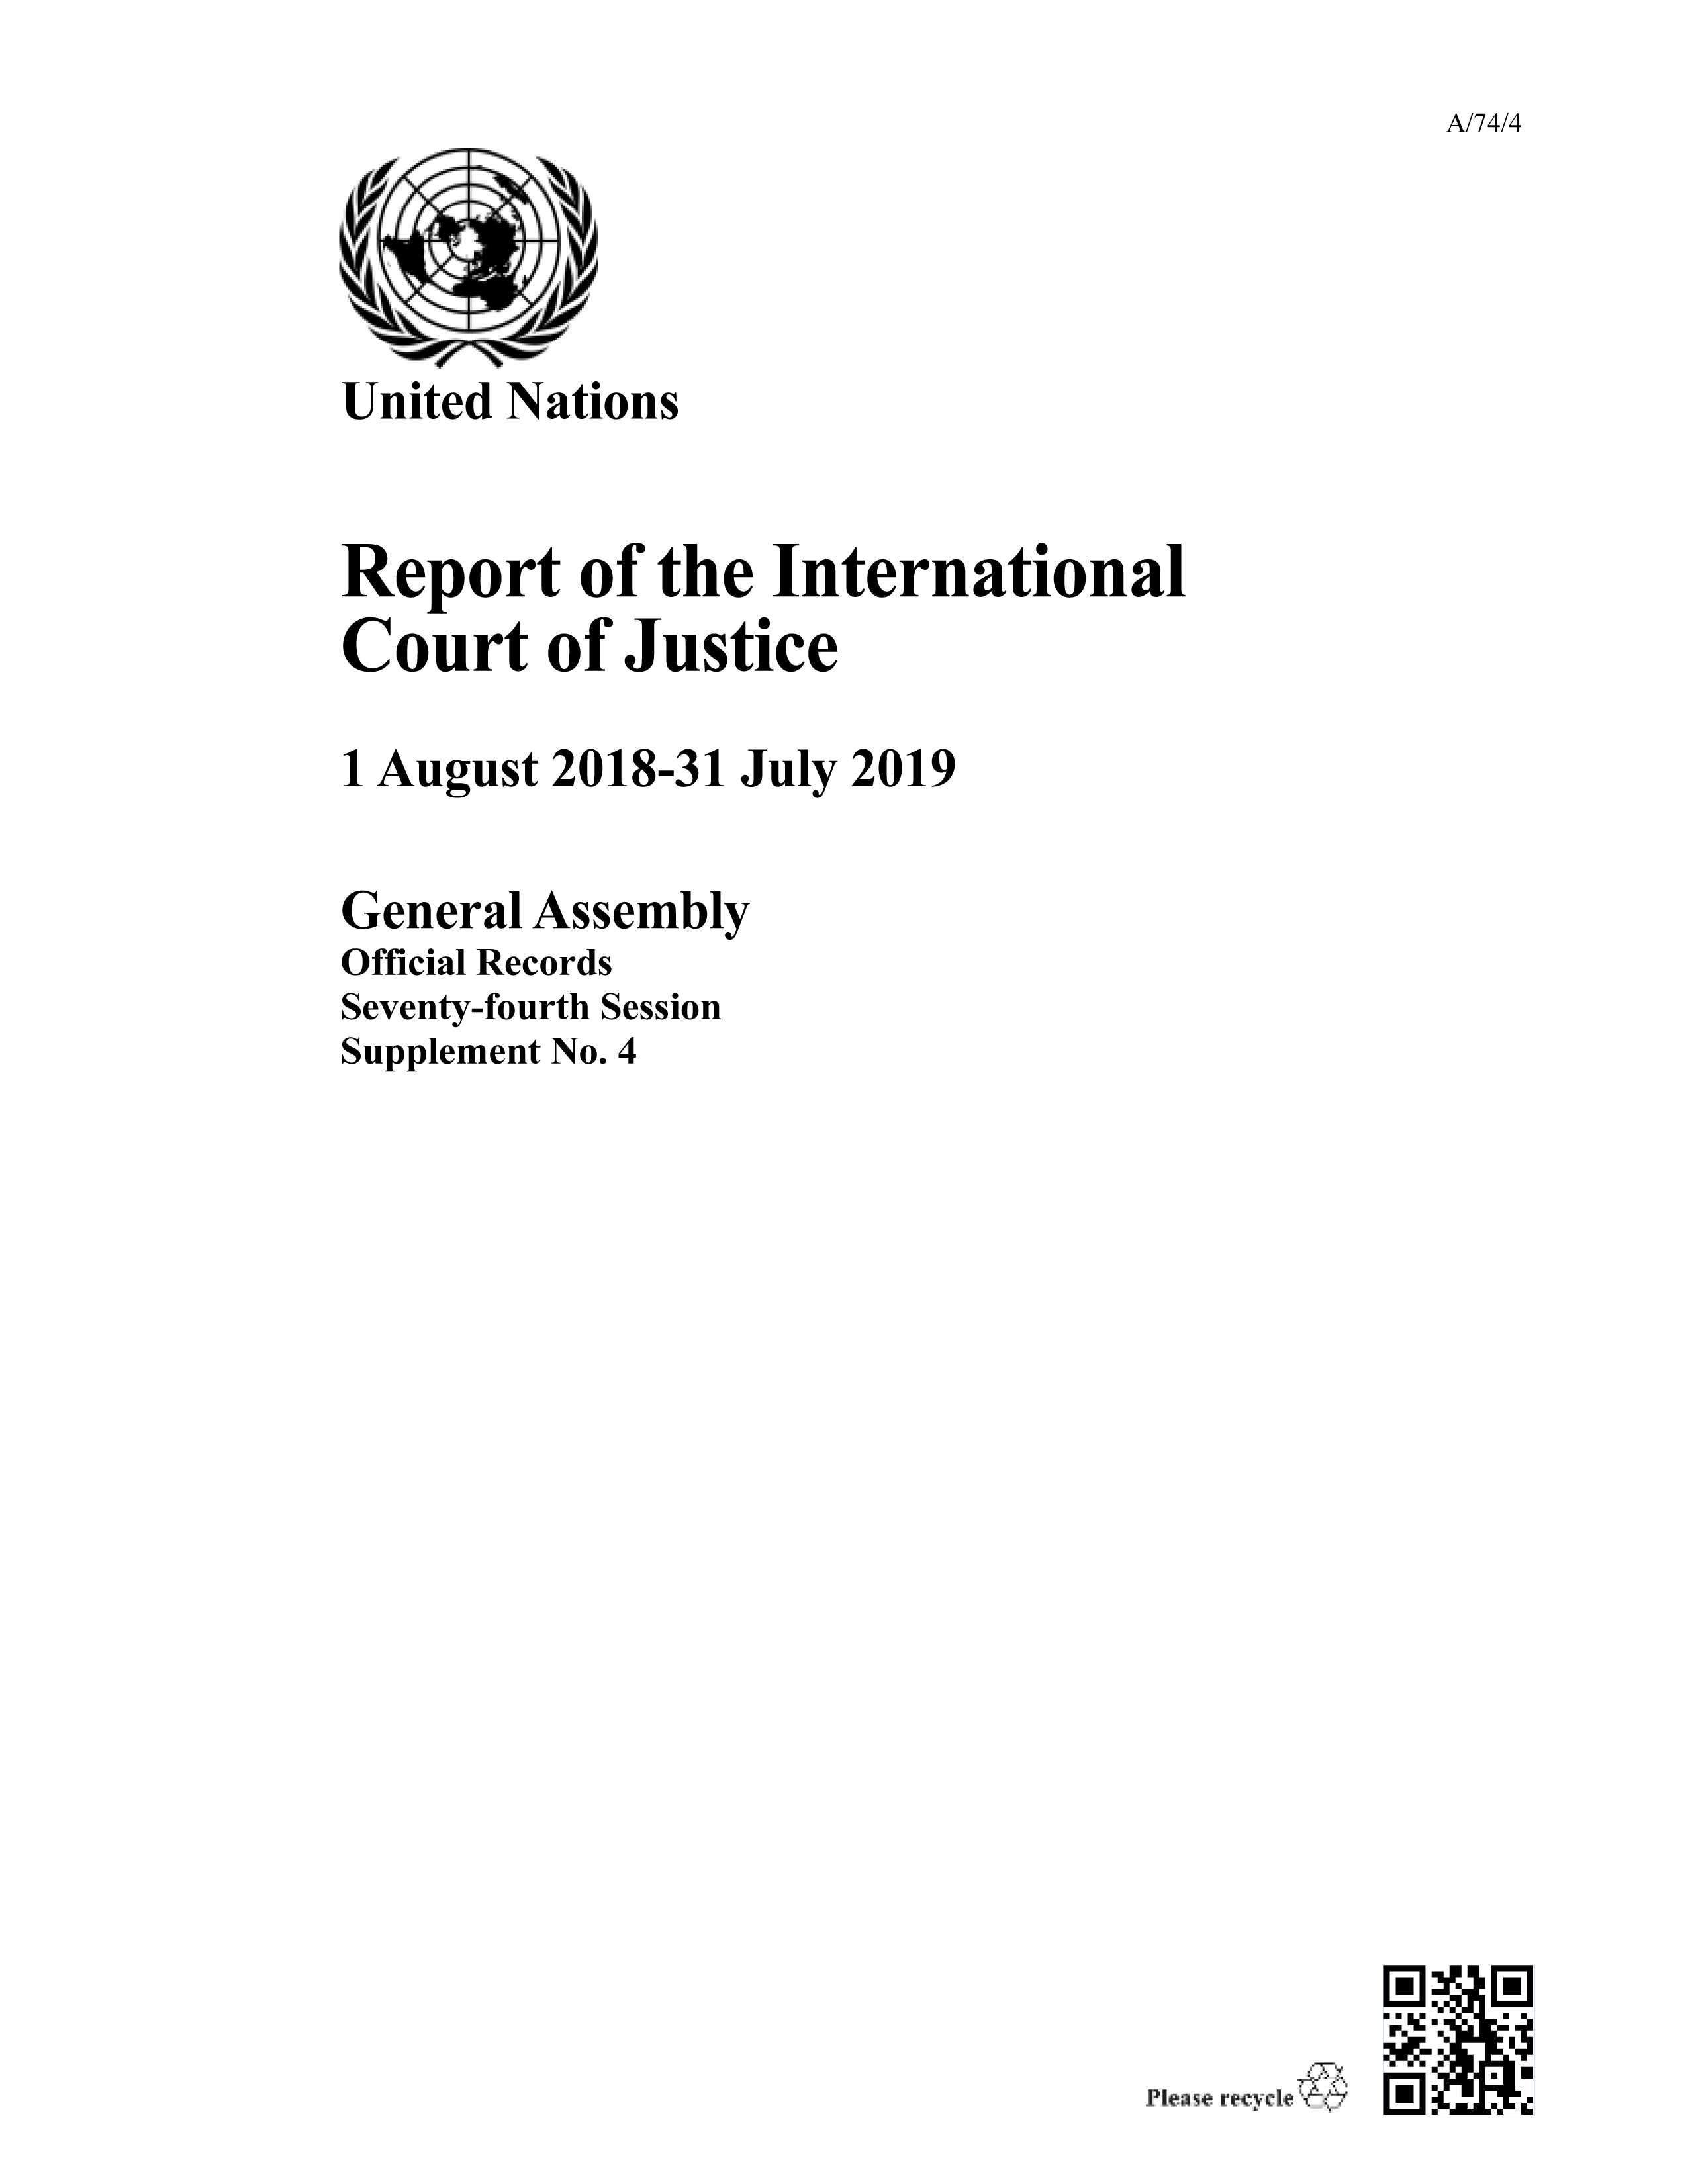 image of Report of the International Court of Justice